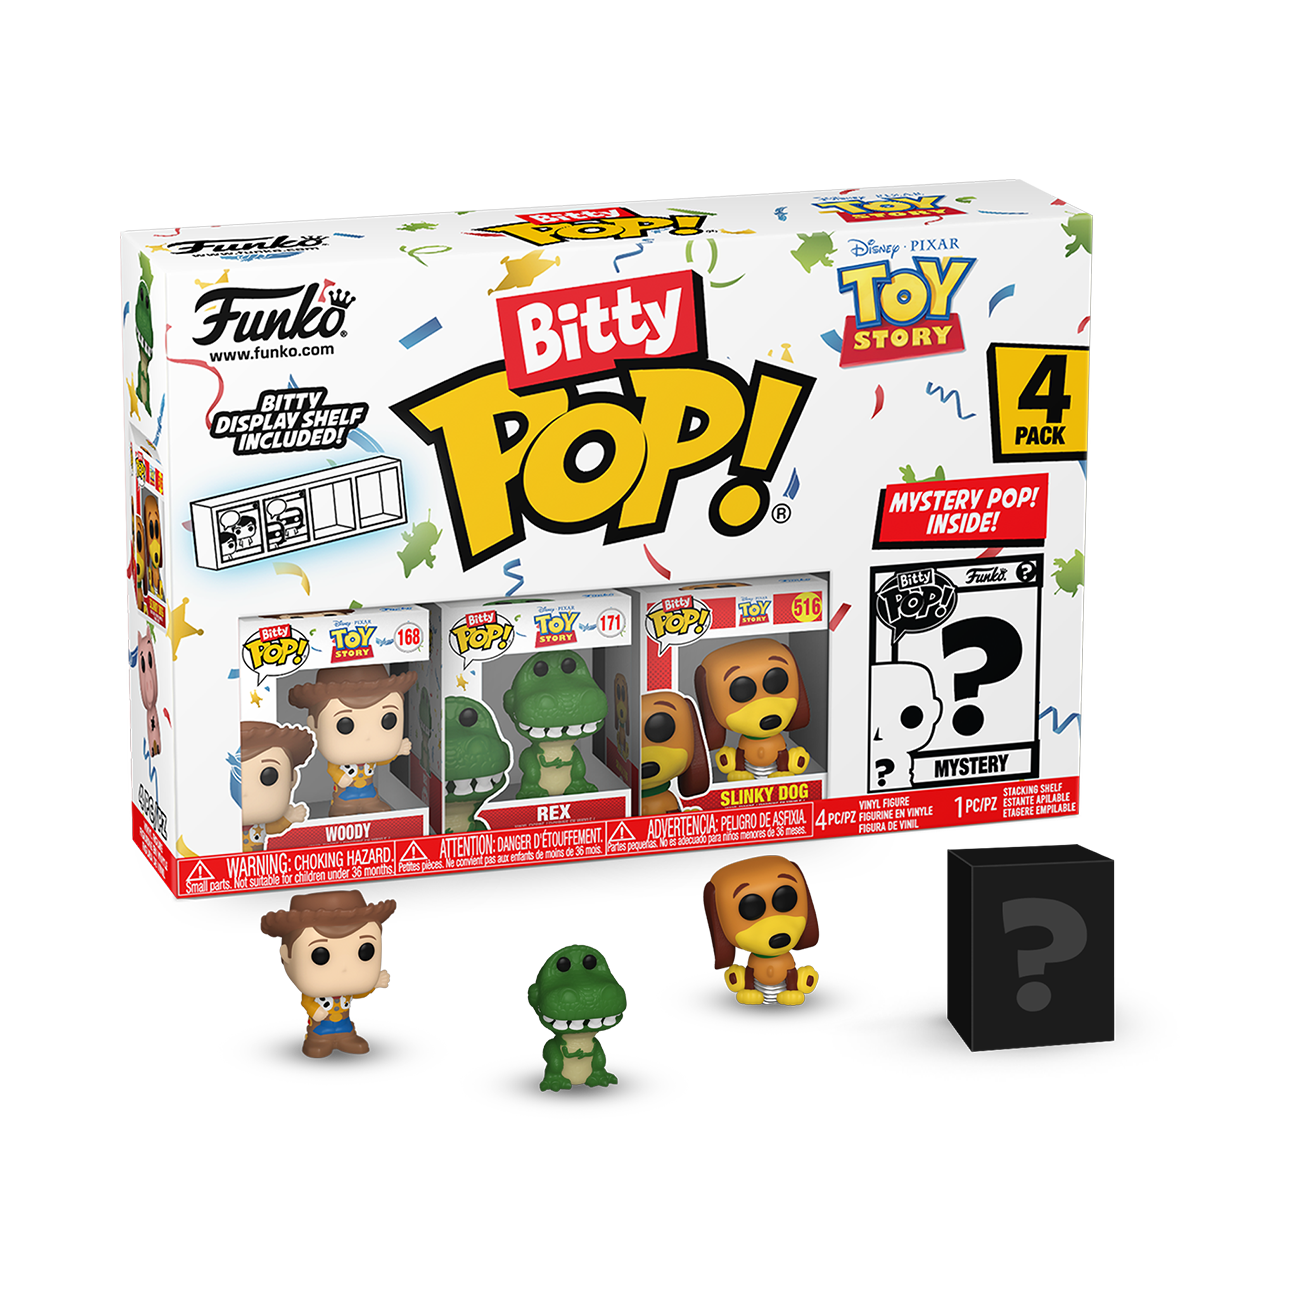 Photos - Action Figures / Transformers Funko BITTY POP! Toy Story 4-Pack Series 3 